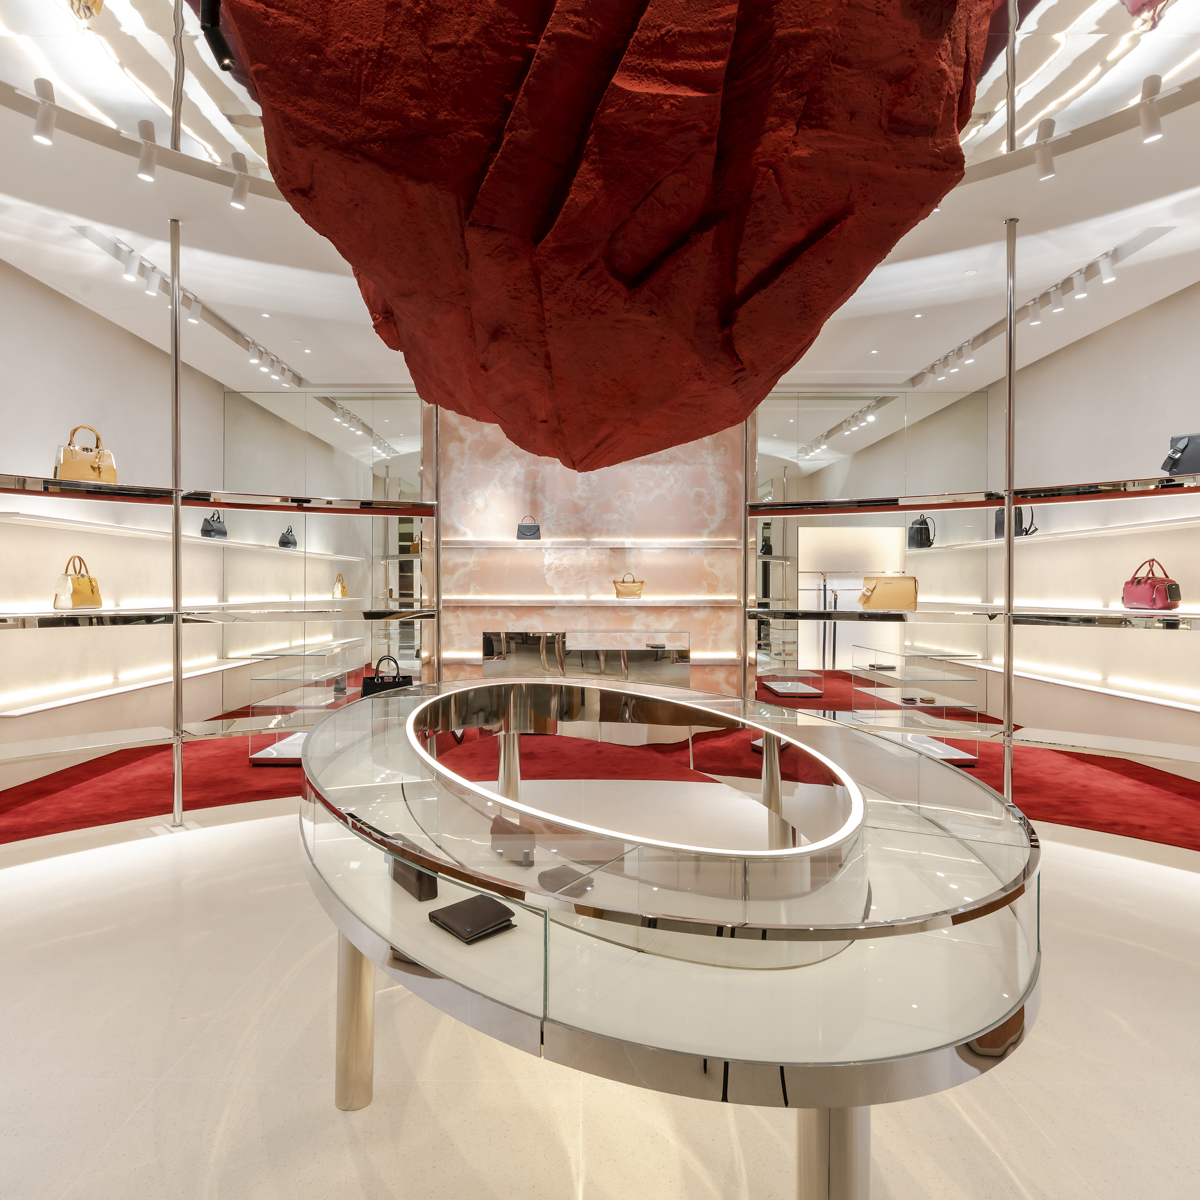 Giant sienna-colored meteor rock is suspended from the ceiling of flagship store in Kuala Lumpur